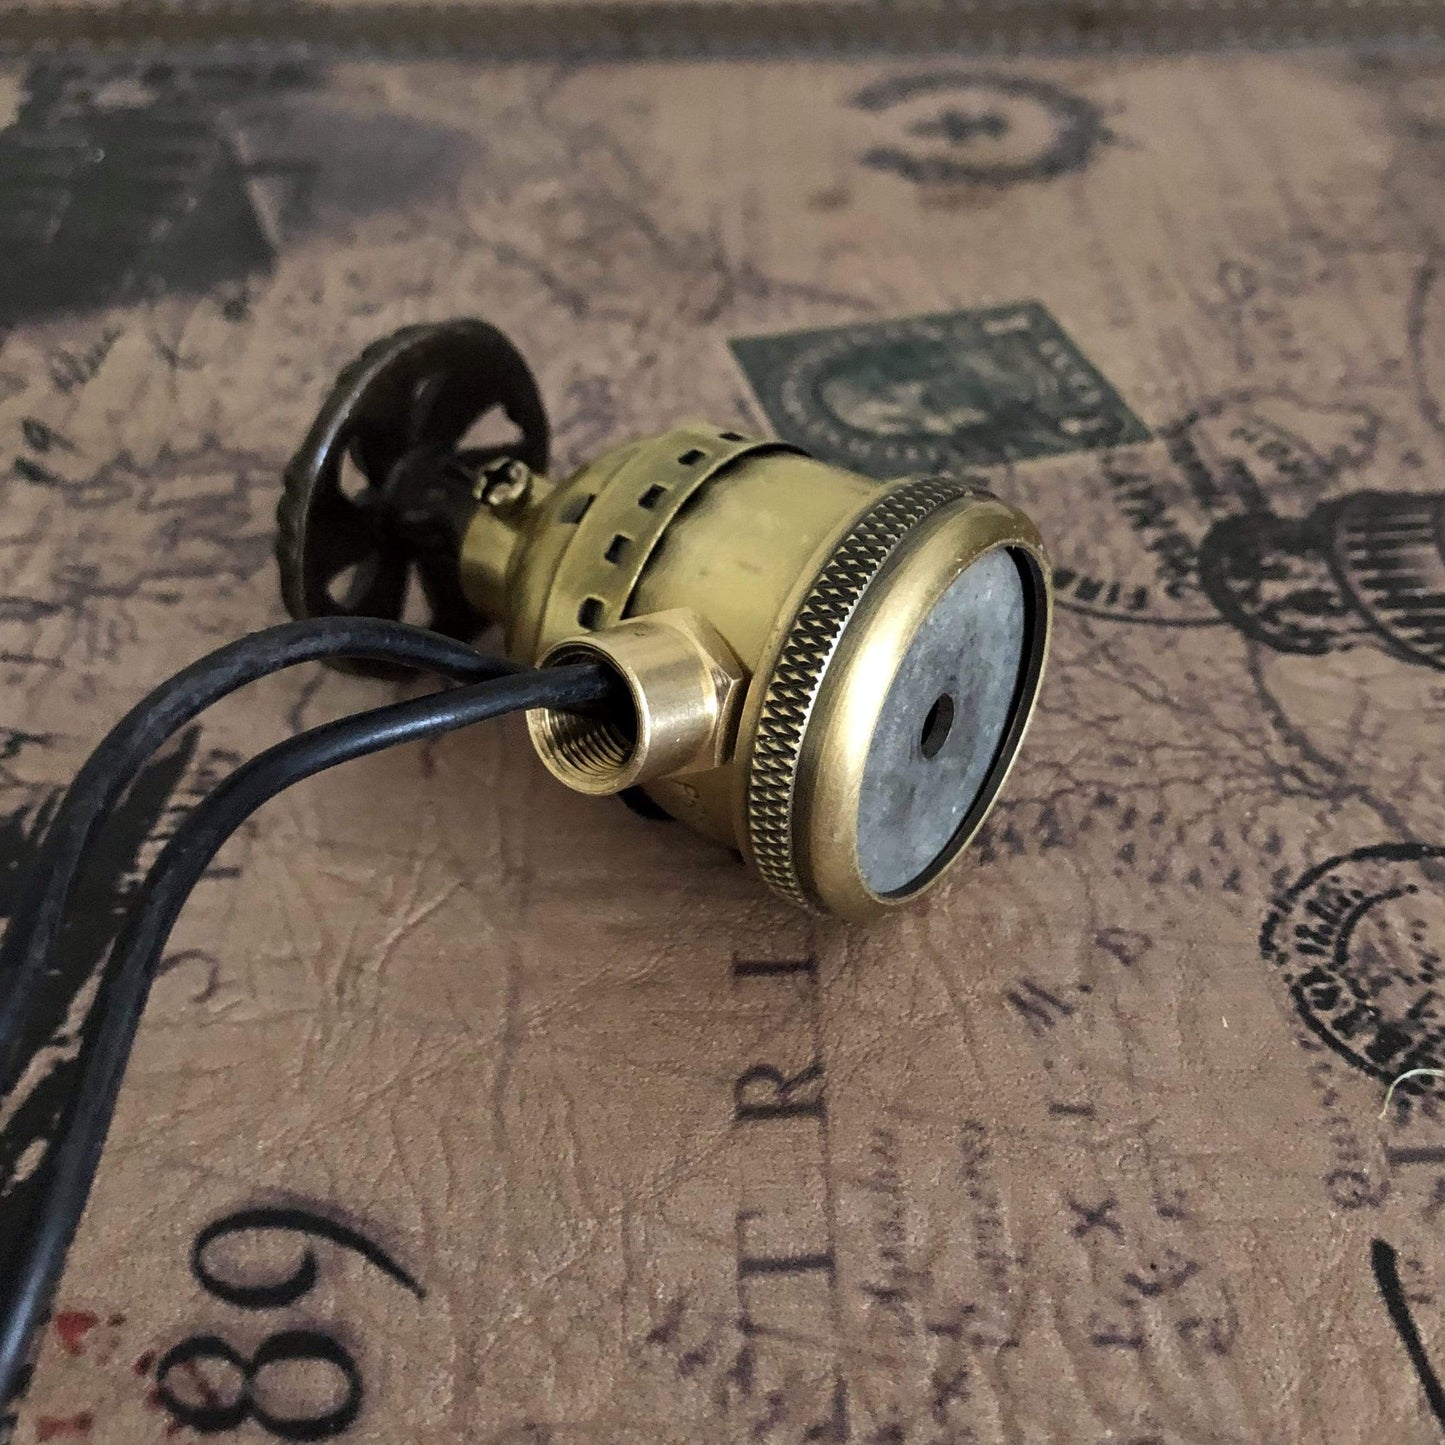 Steampunk Lamp Dimmer Switch - Antique lamp parts by MillerLight